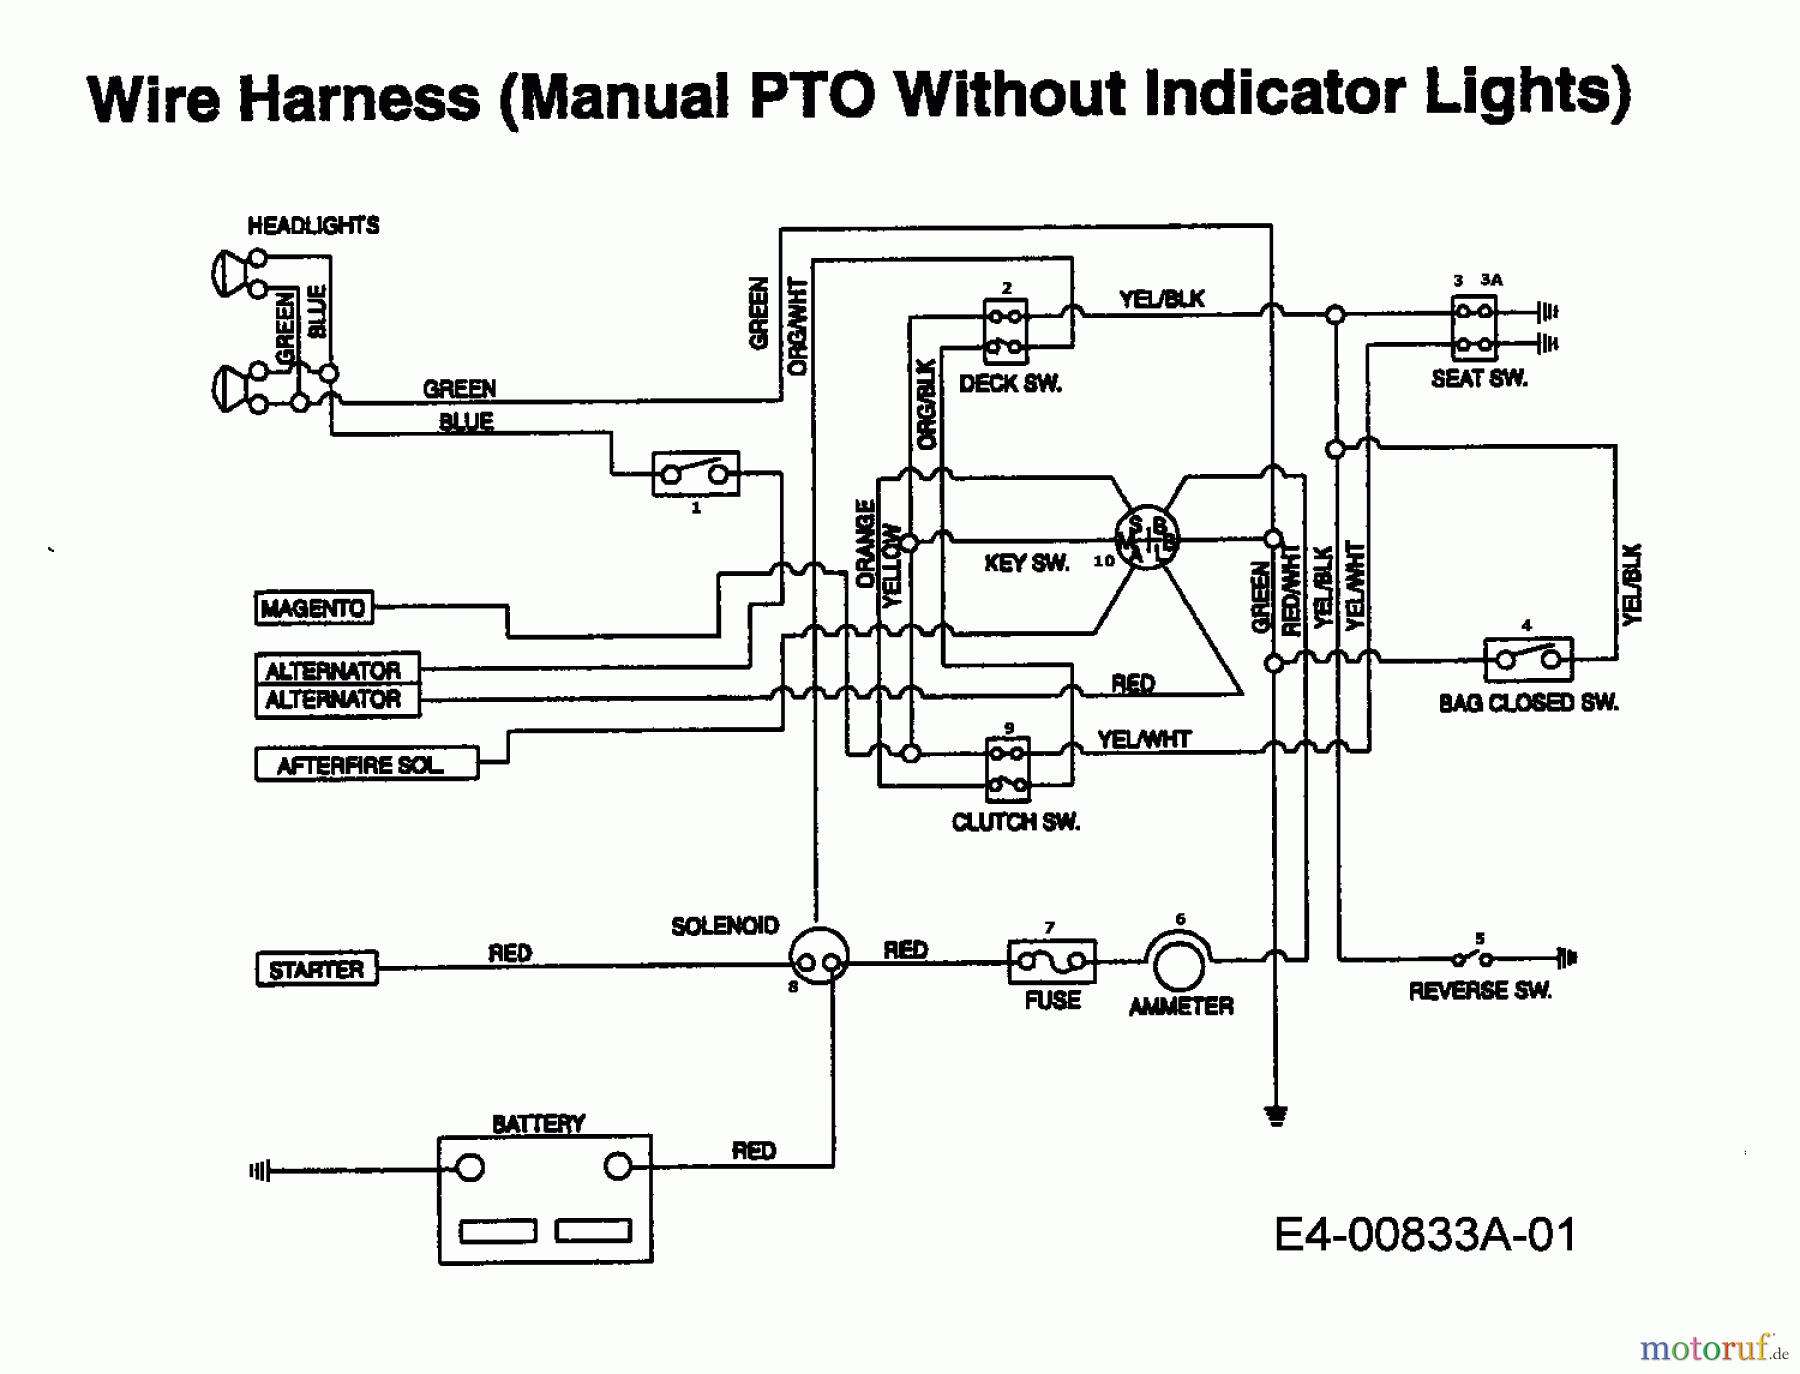  White Lawn tractors EH/130 13CA796N679  (1999) Wiring diagram without indicator lights